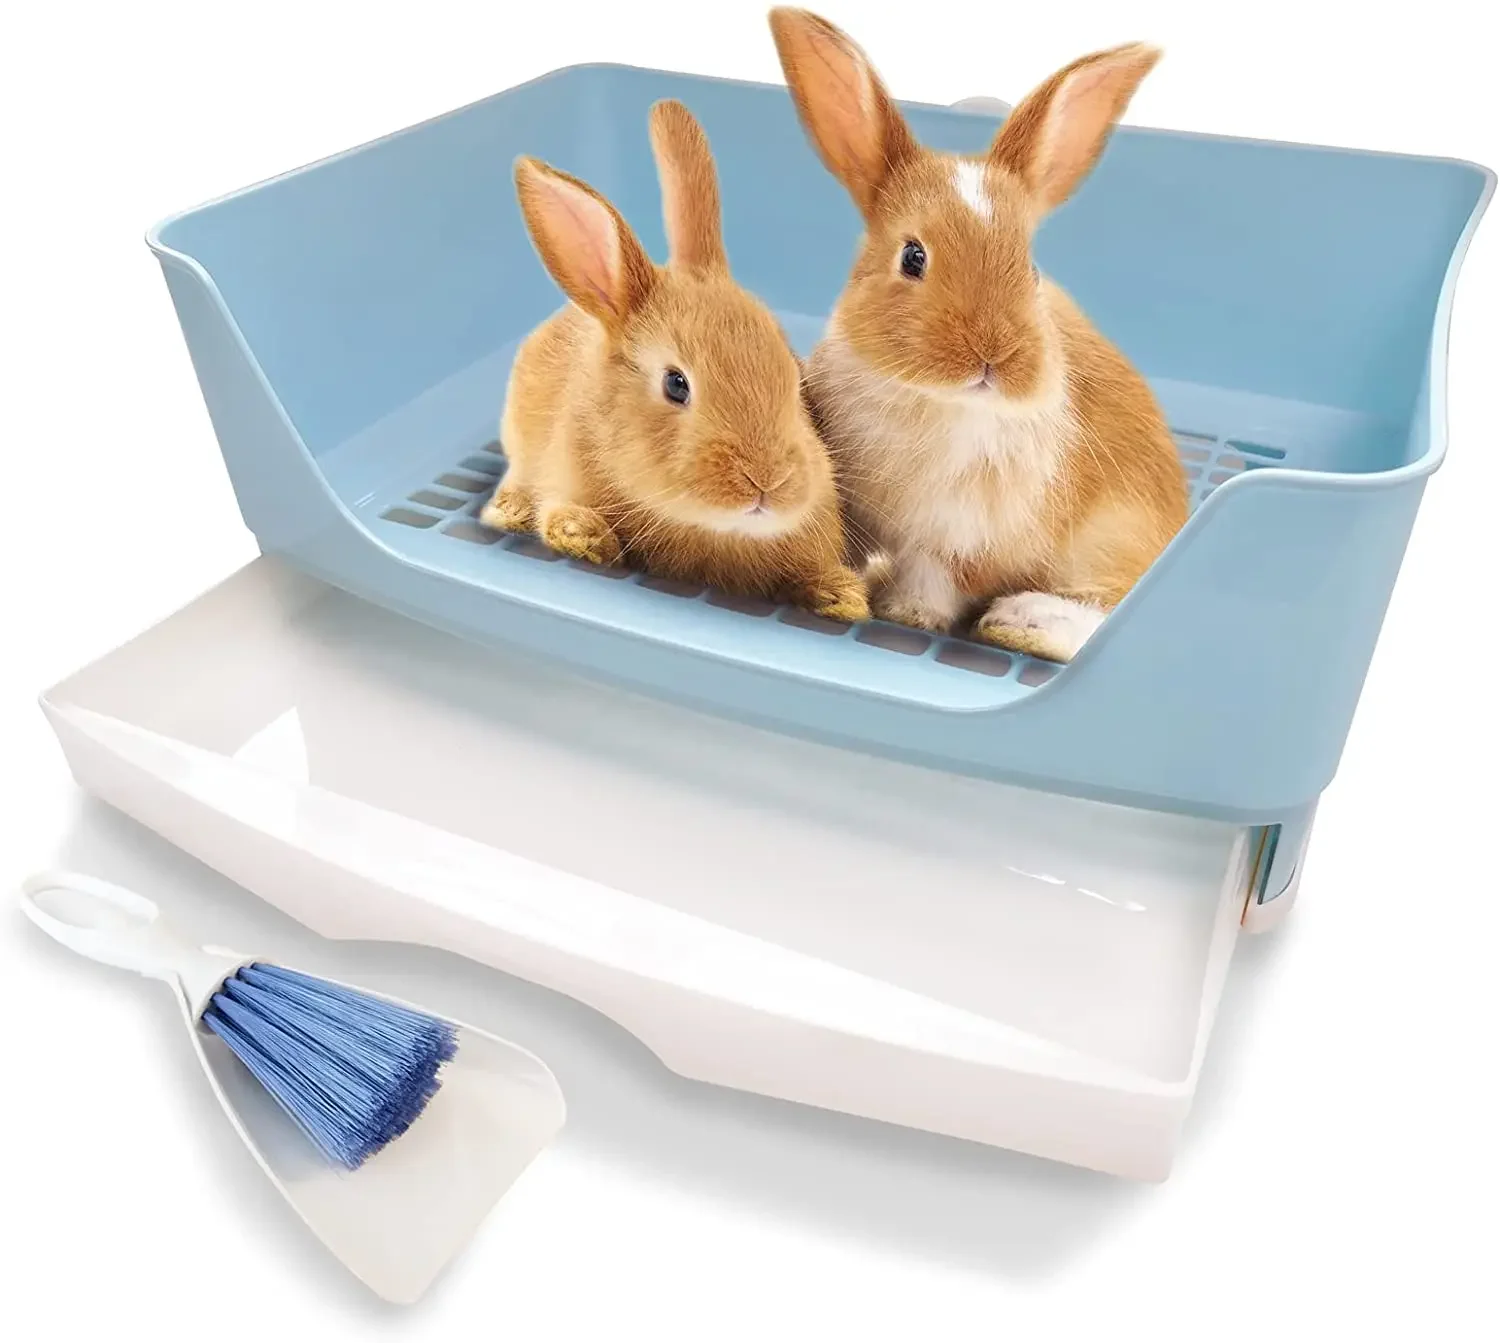 

Large Rabbit Litter Box Set Round Corner Toilet Bedpan with Drawer Easy to Clean for Adult Hamster Guinea Pig Ferret Bunny